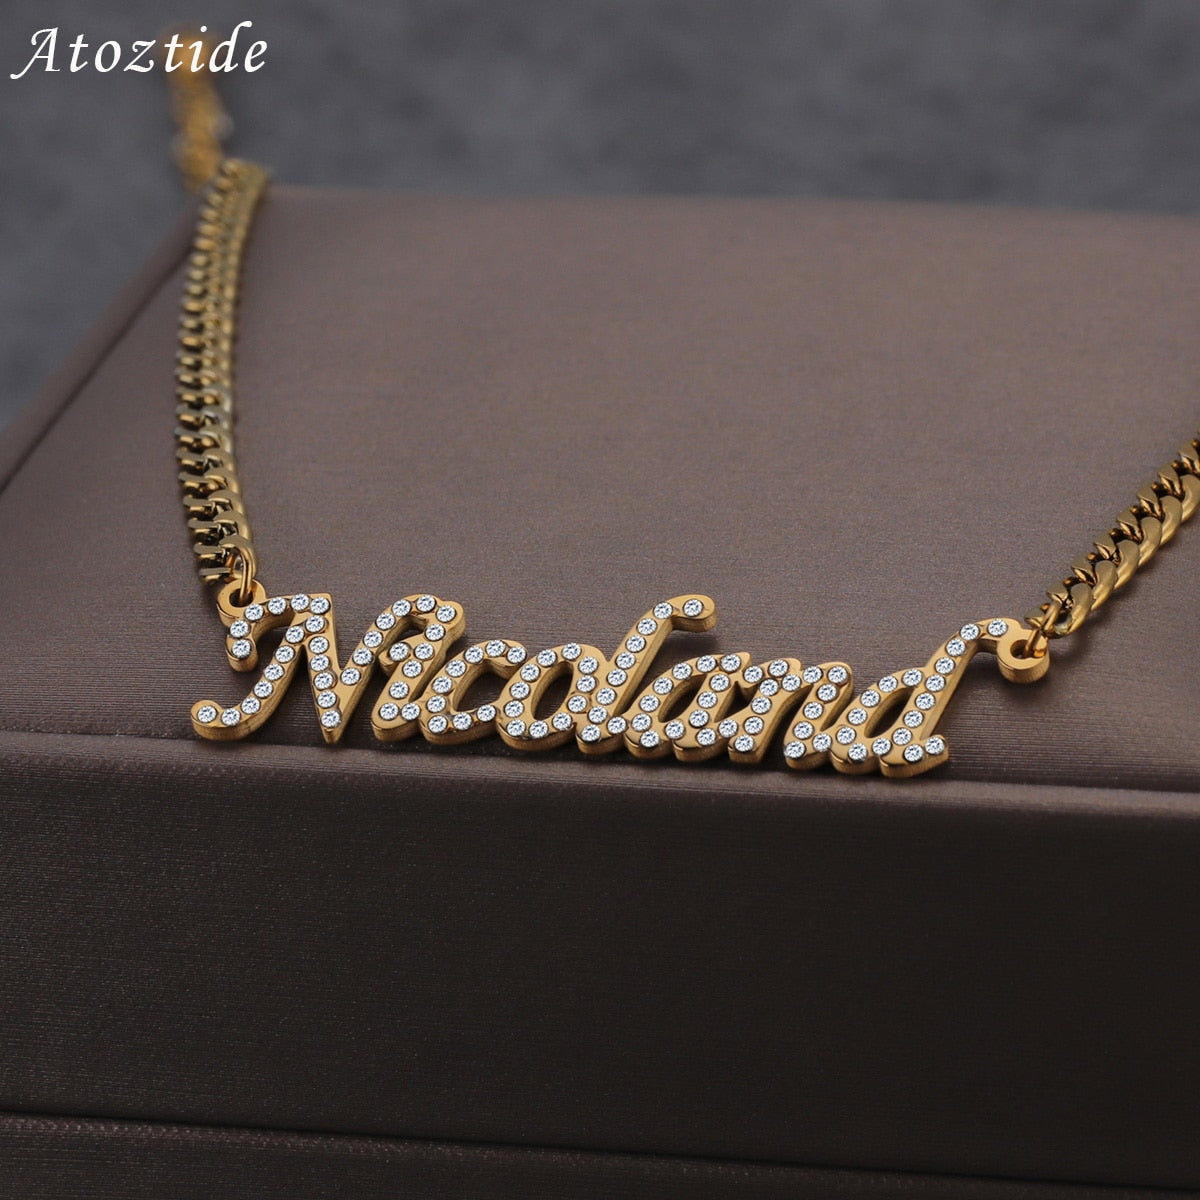 Custom Personalized Name Stainless Steel Necklaces Cubic Zircon Letters Crystal Pendant for Women Thick 4mm NK Chain Jewelry